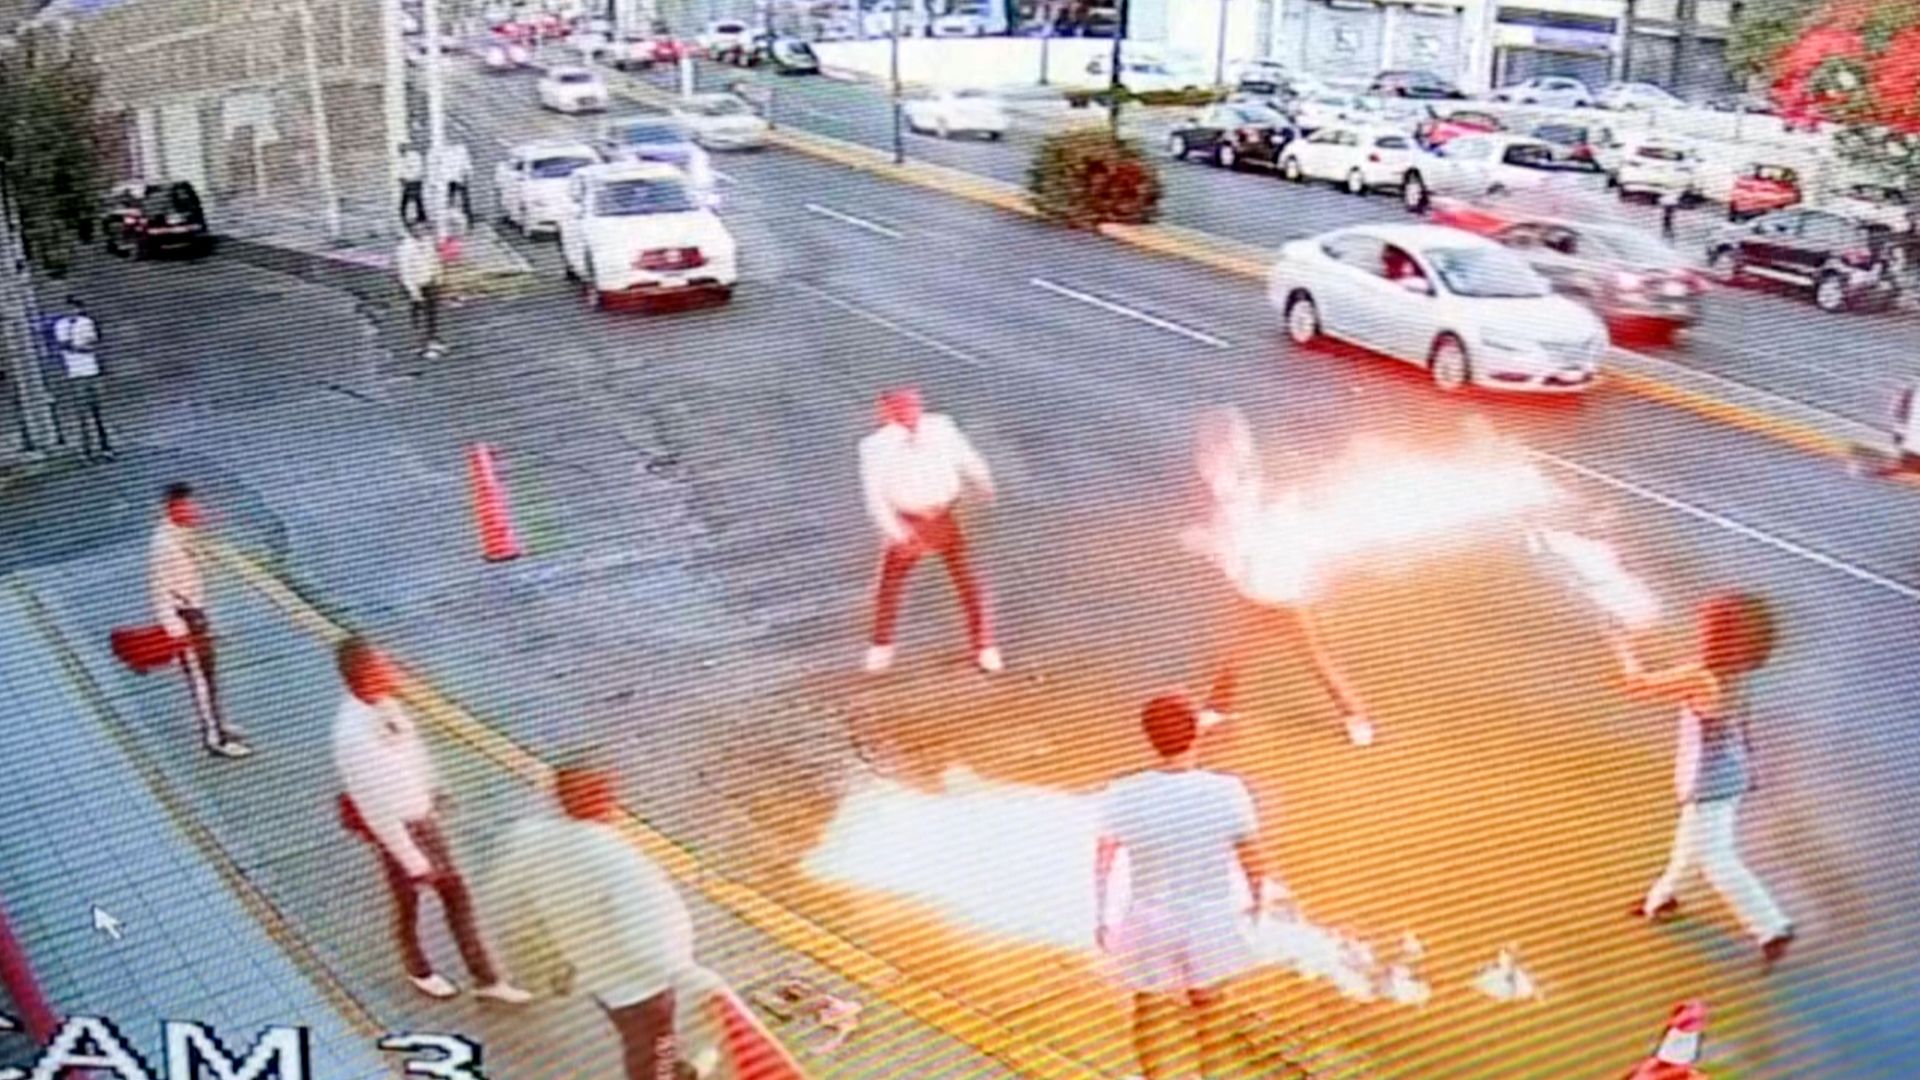 Fire-breather fights off marauding mariachis in 'turf war over tips'